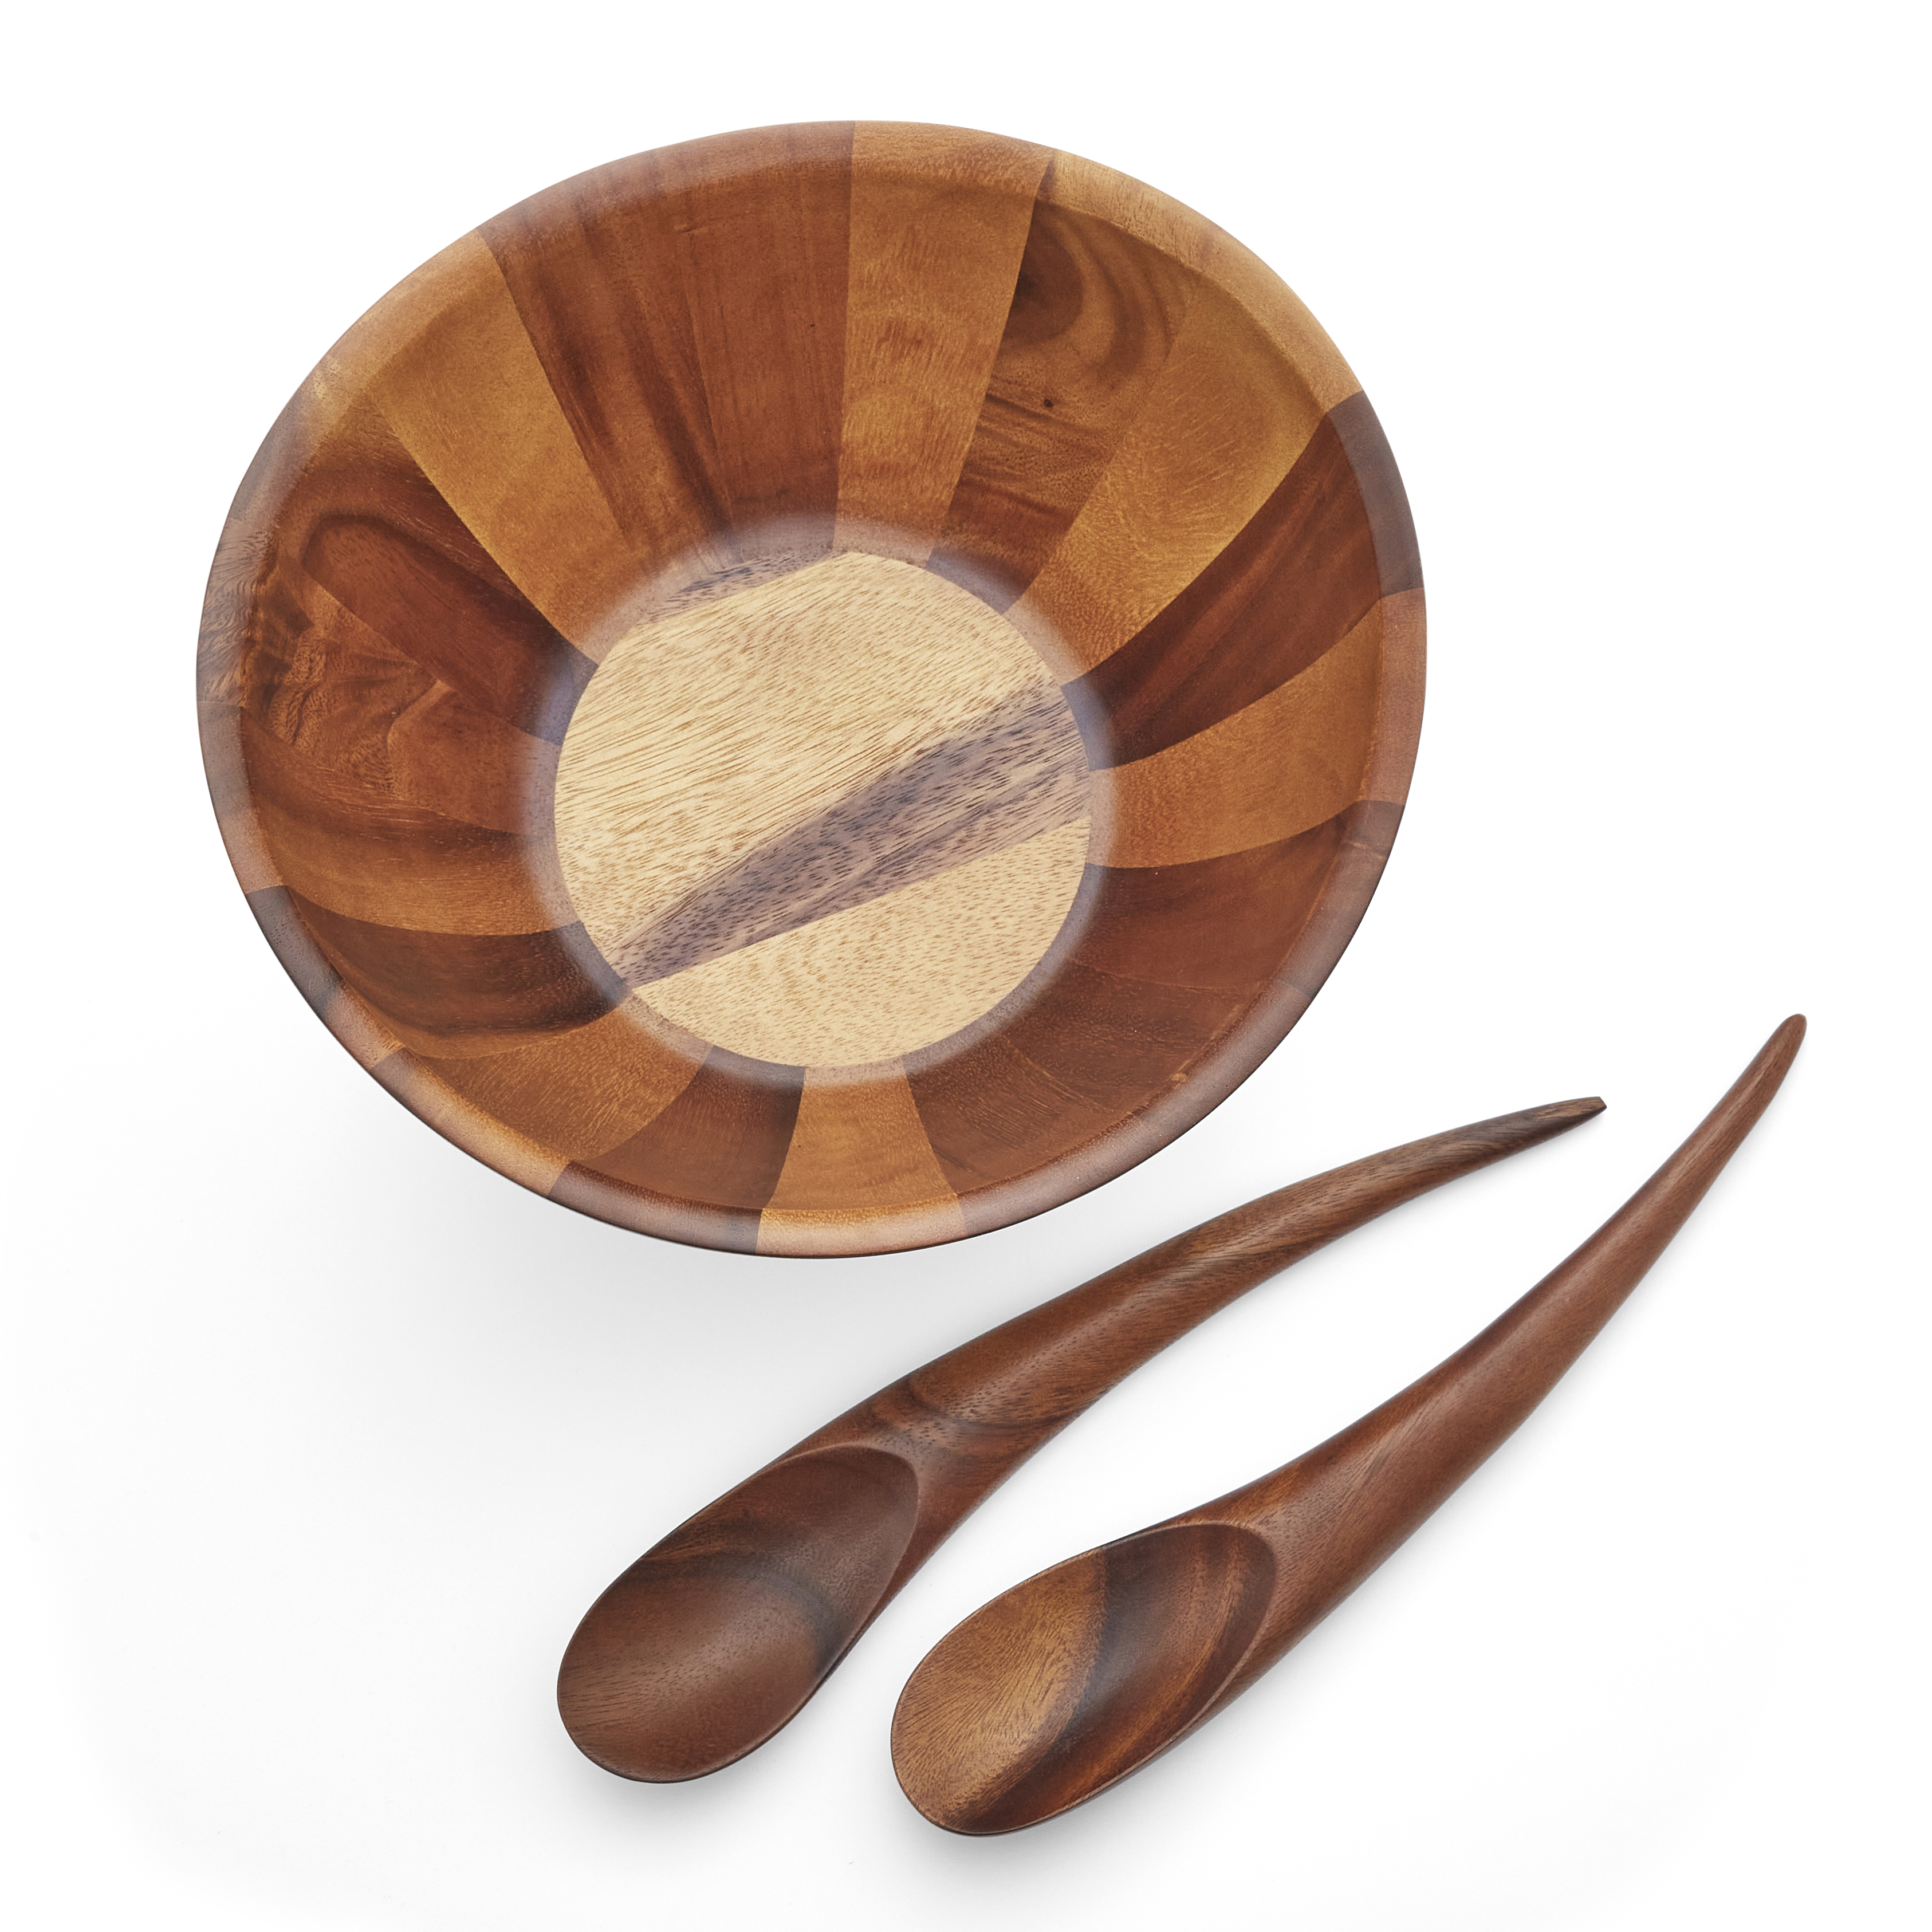 Details about   Nambe Gourmet Harmony 3 Piece Wooden Salad Set 